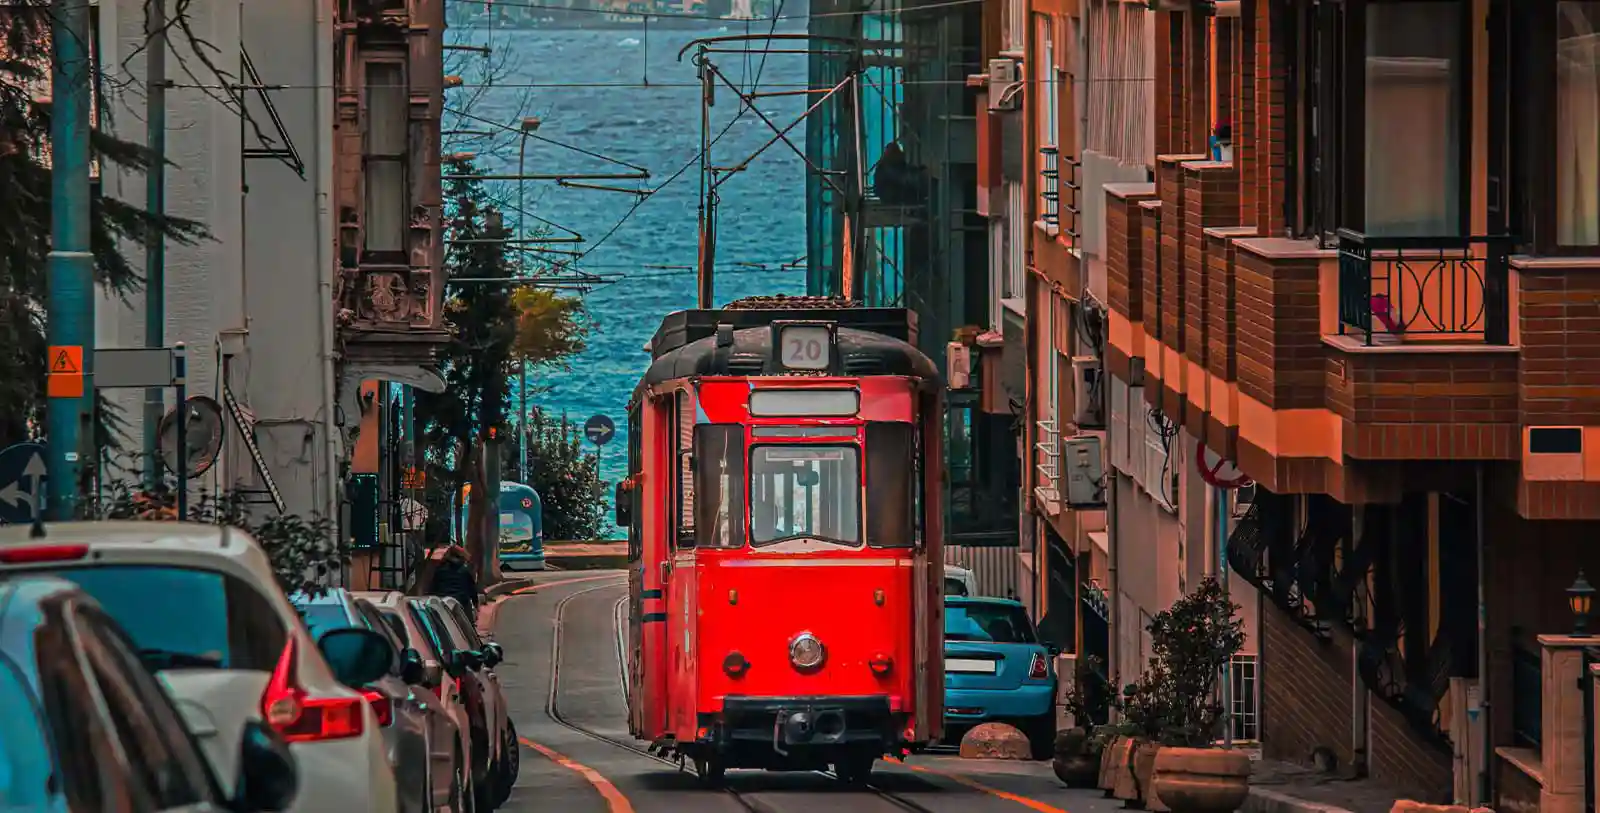 Anatolian Istanbul has its own atmosphere, A spectacular view to the sea of Maramara in Kadikoy with a red tram in picture